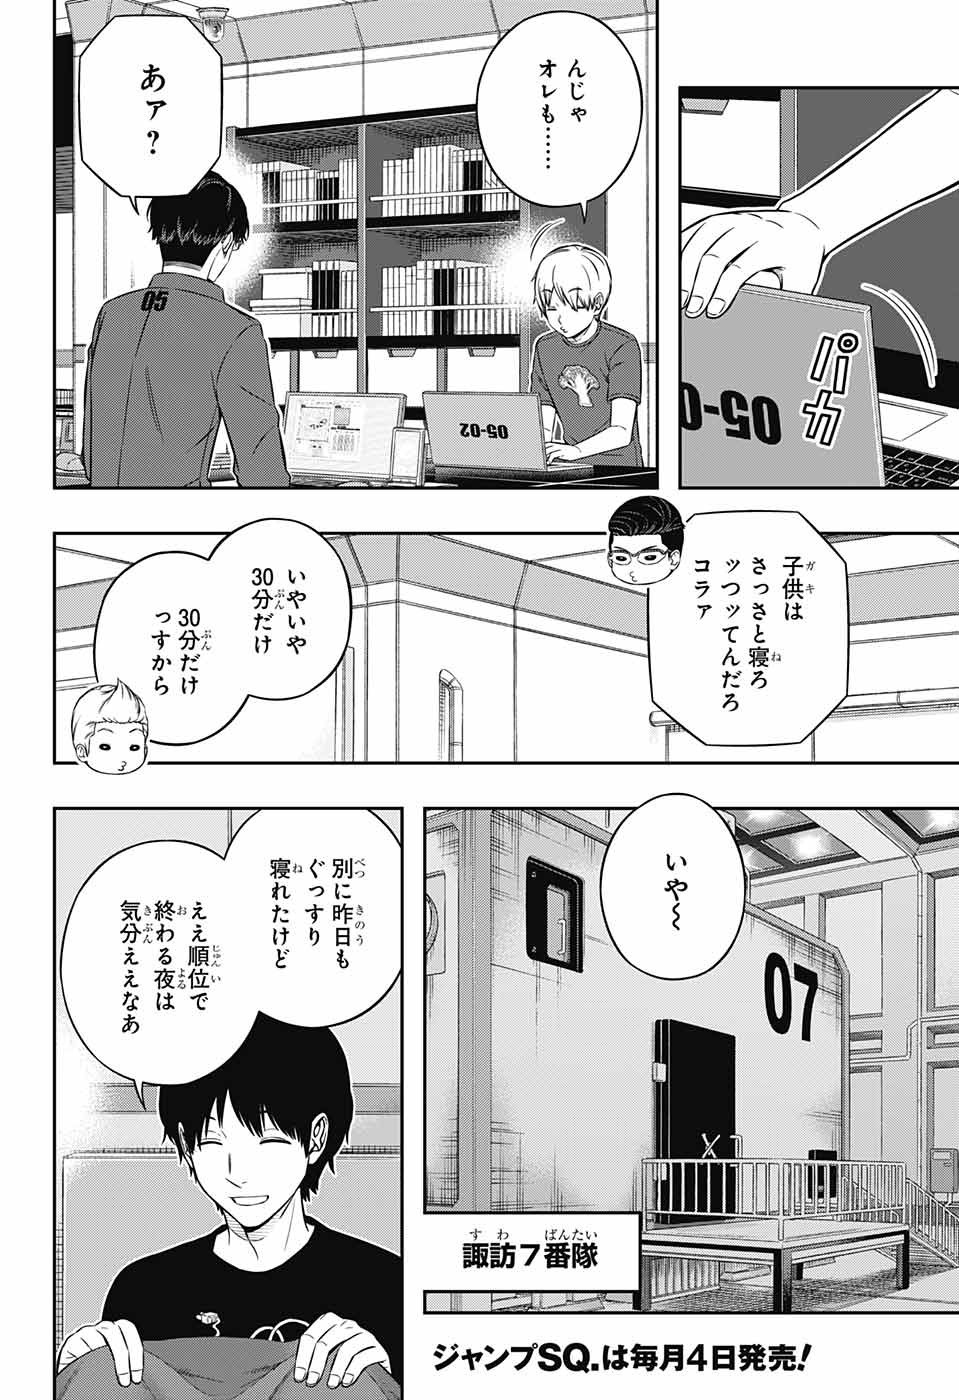 World Trigger - Chapter 222 - Page 16